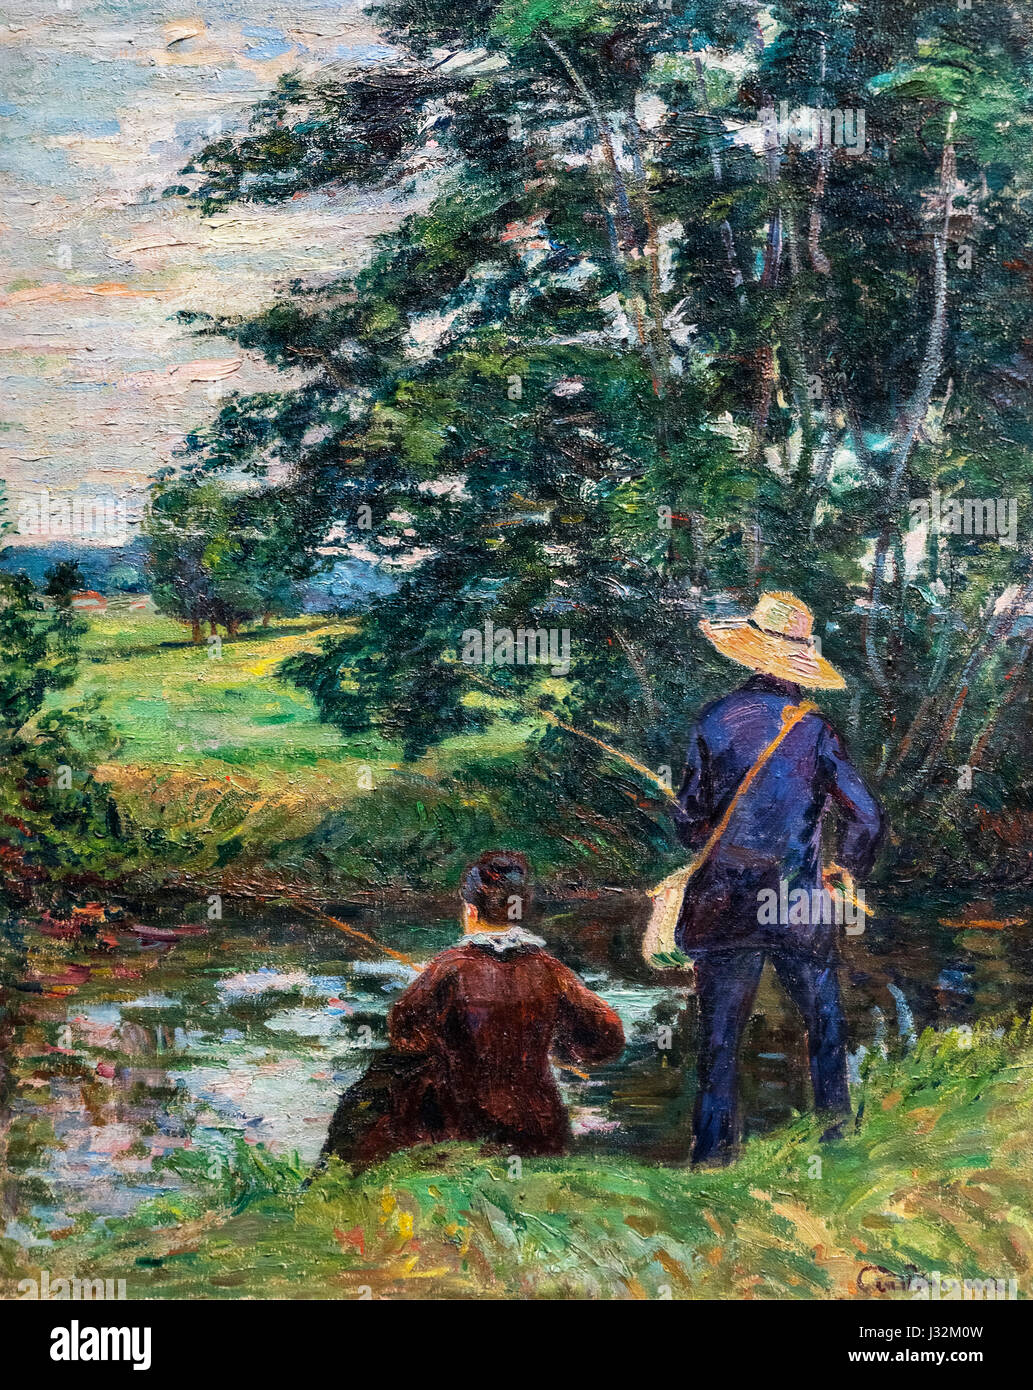 Armand Guillaumin (1841-1927) 'Les Pecheurs' (The Fishers), oil on canvas, c.1885. Stock Photo